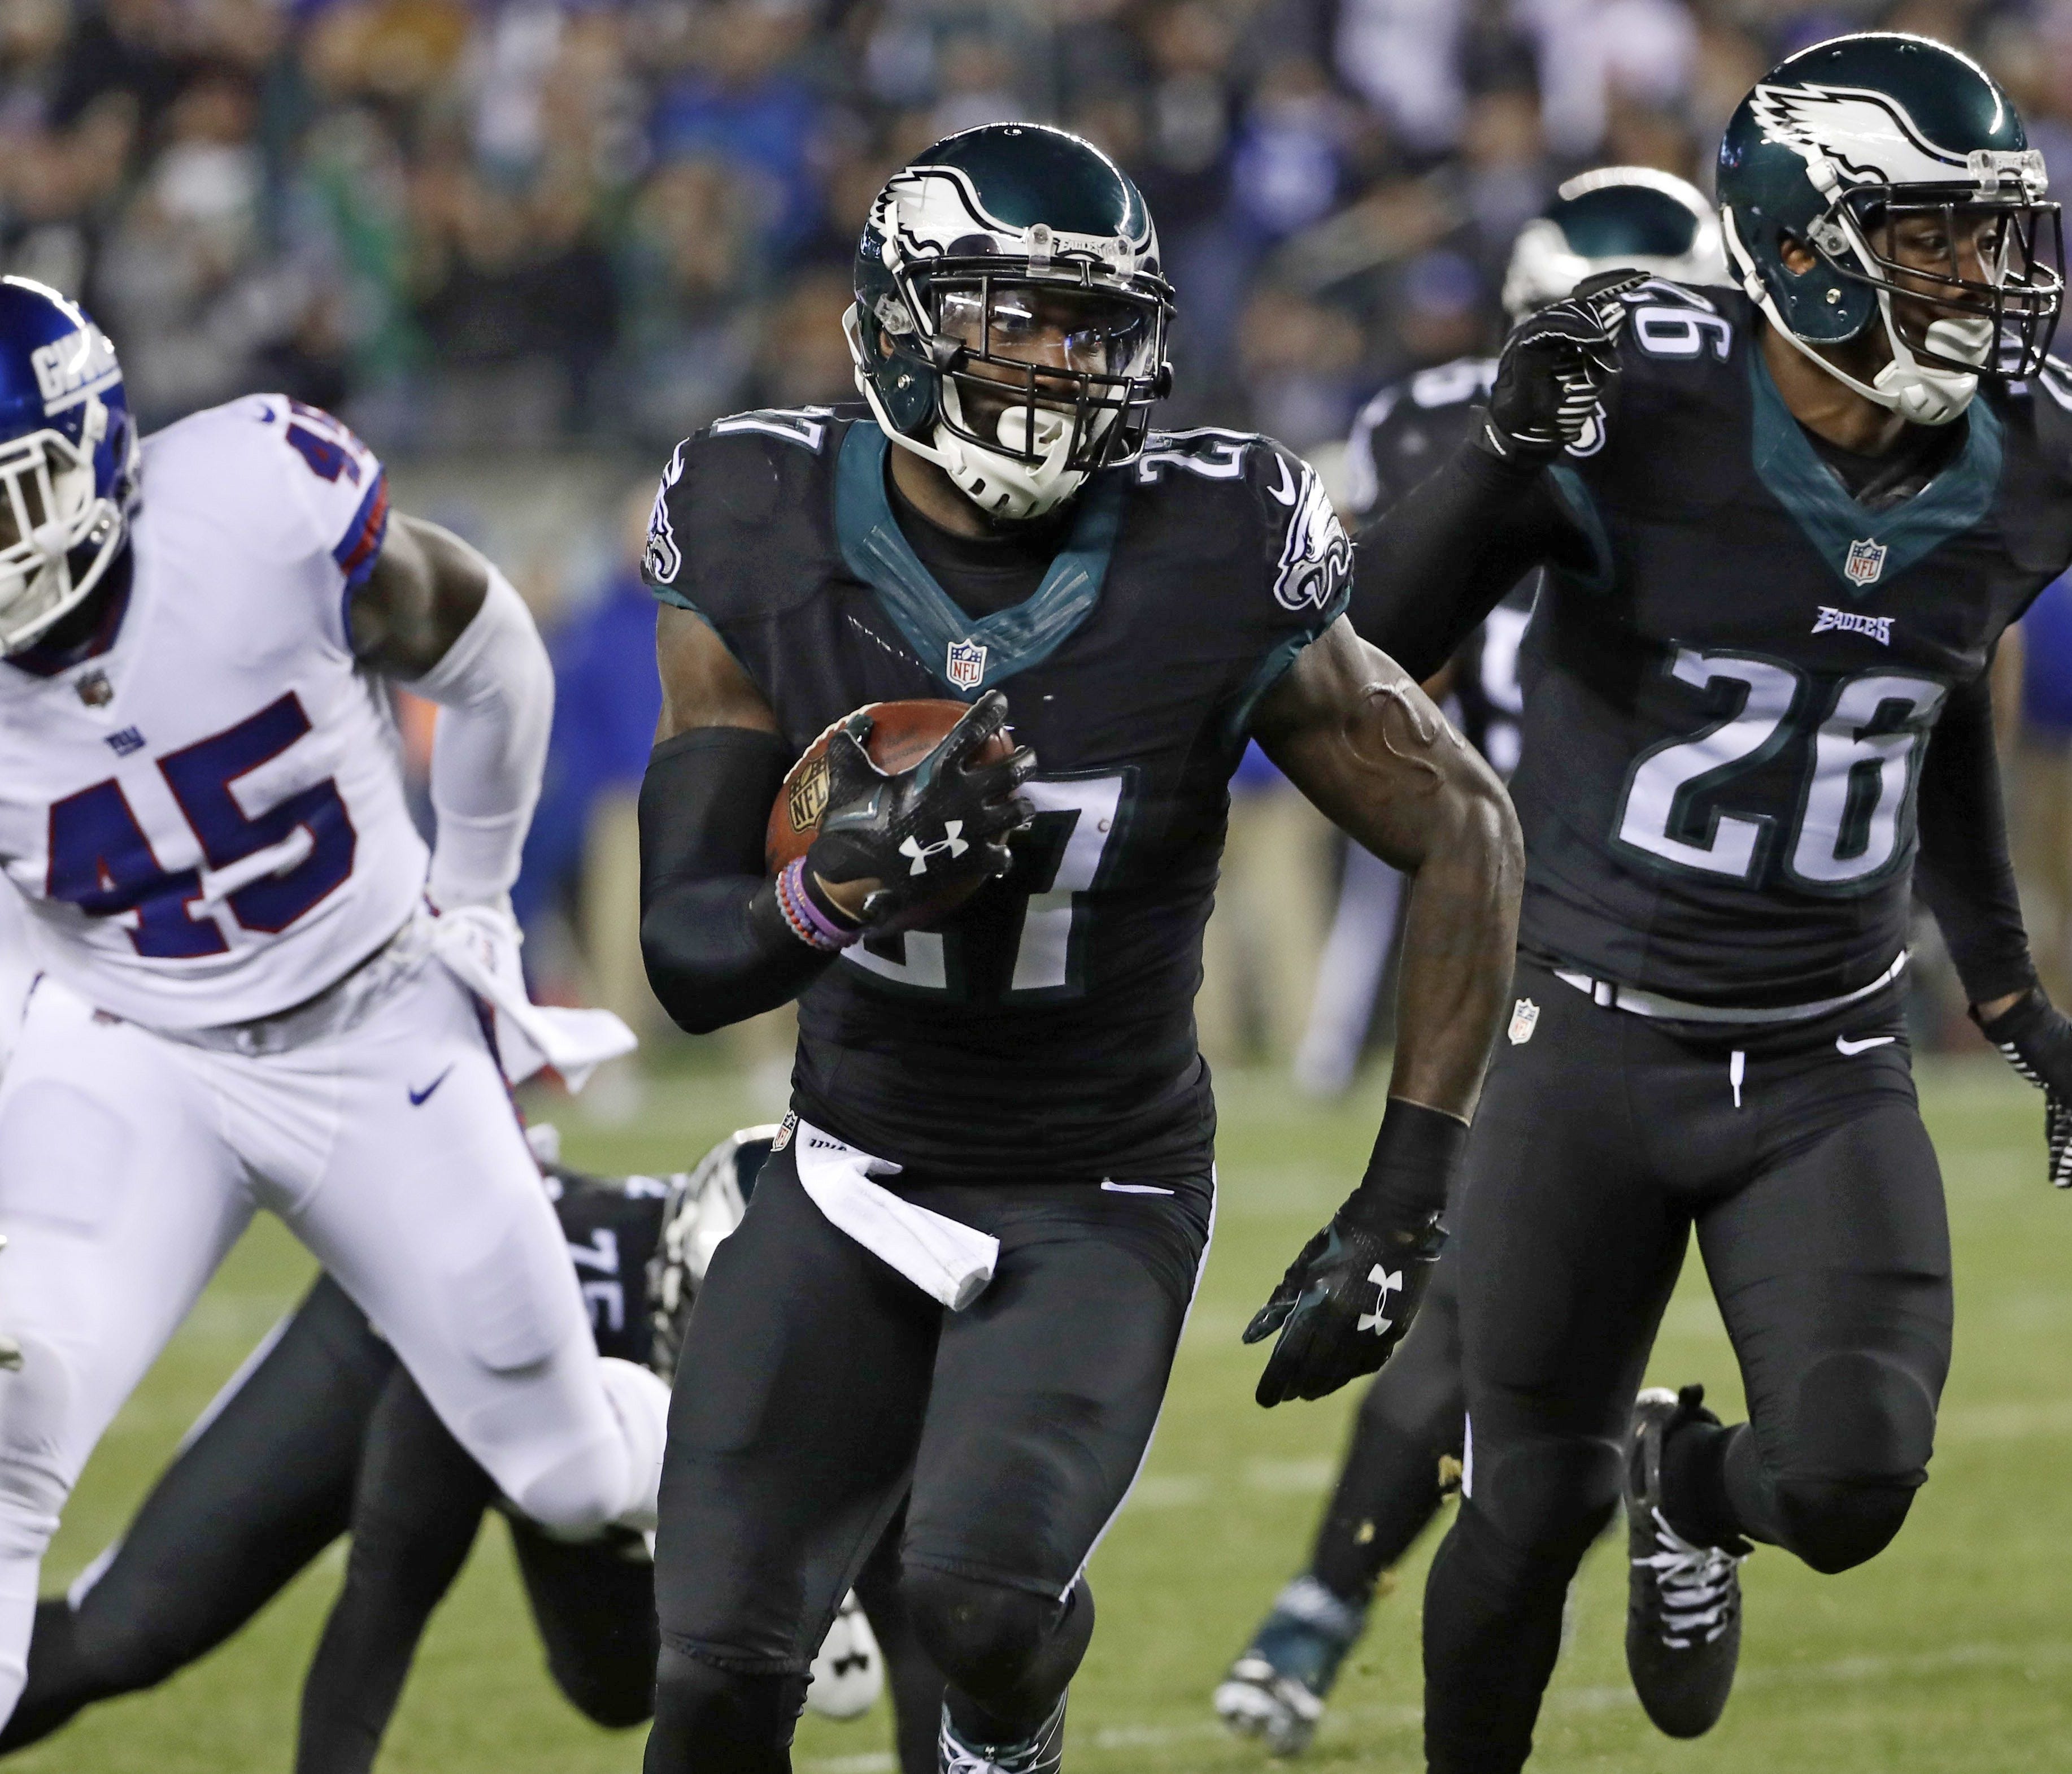 Philadelphia Eagles' Malcolm Jenkins (27) runs for a touchdown after intercepting a pass during the first half of an NFL football game against the New York Giants, Thursday, Dec. 22, 2016, in Philadelphia. (AP Photo/Michael Perez)